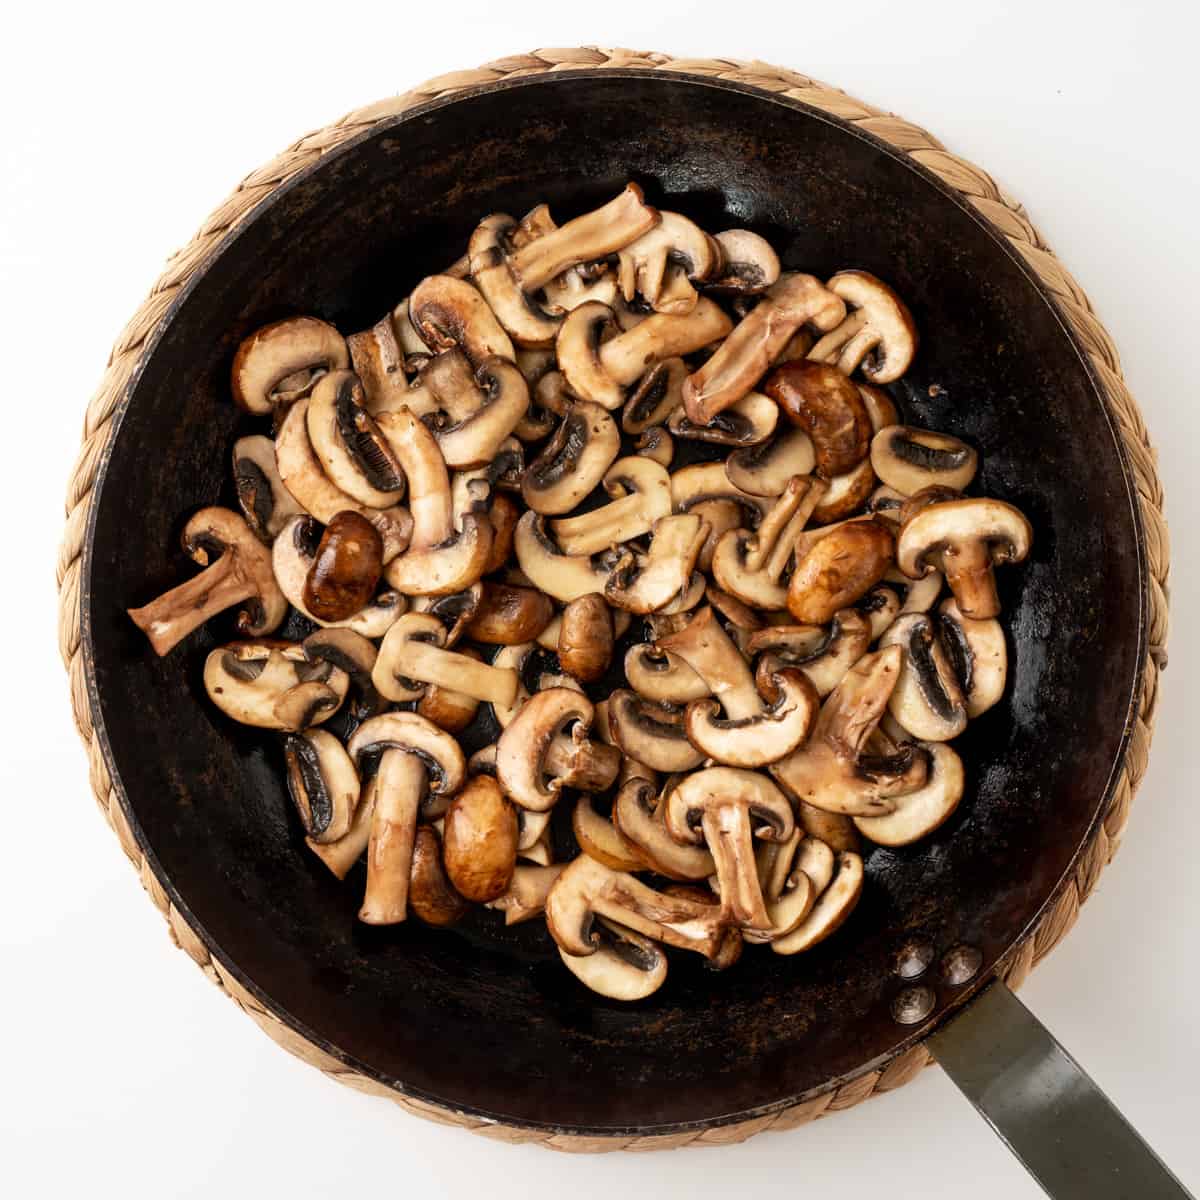 A large skillet with sliced mushrooms.